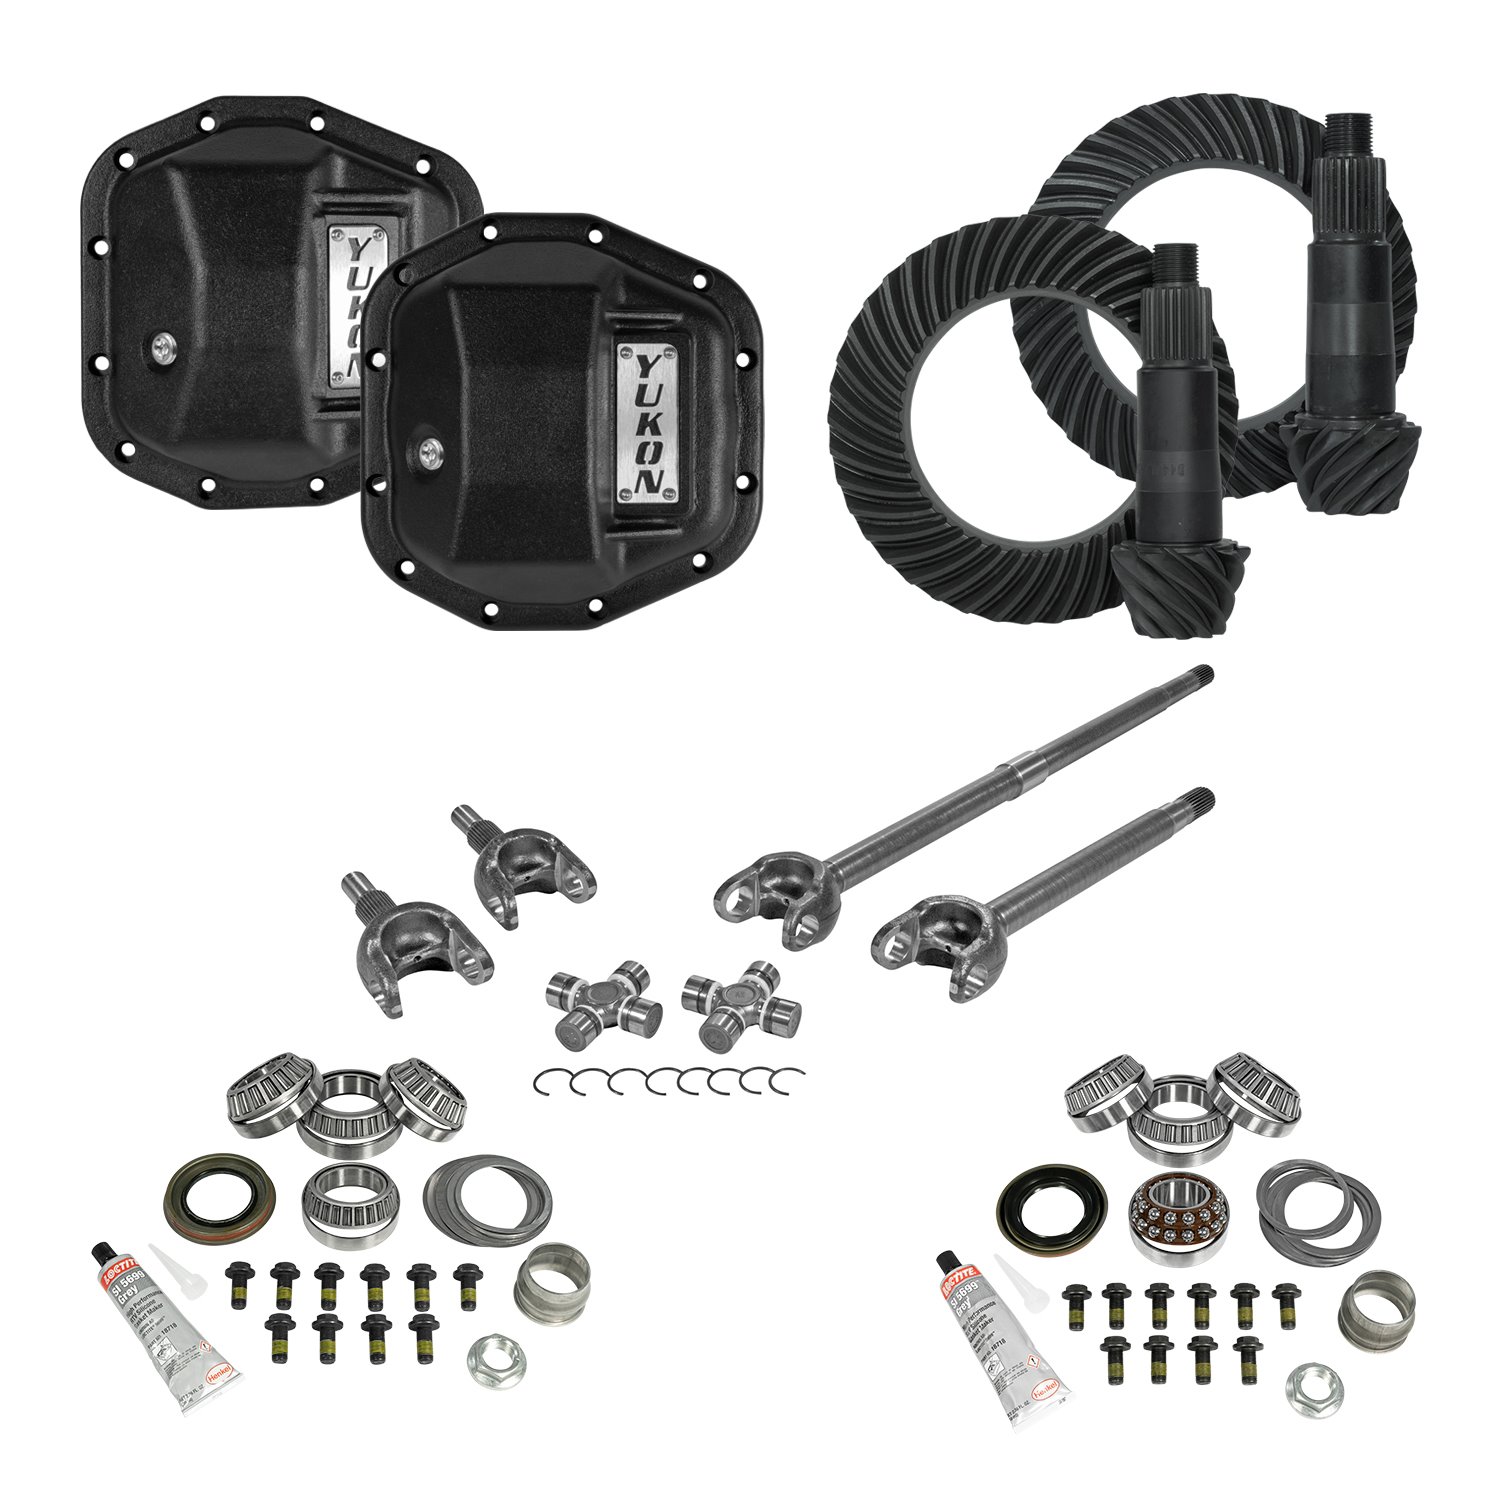 Stage 3 Jeep Jl/Jt Re-Gear Kit W/Covers, Front Axles, Dana 44, 5.13 Ratio